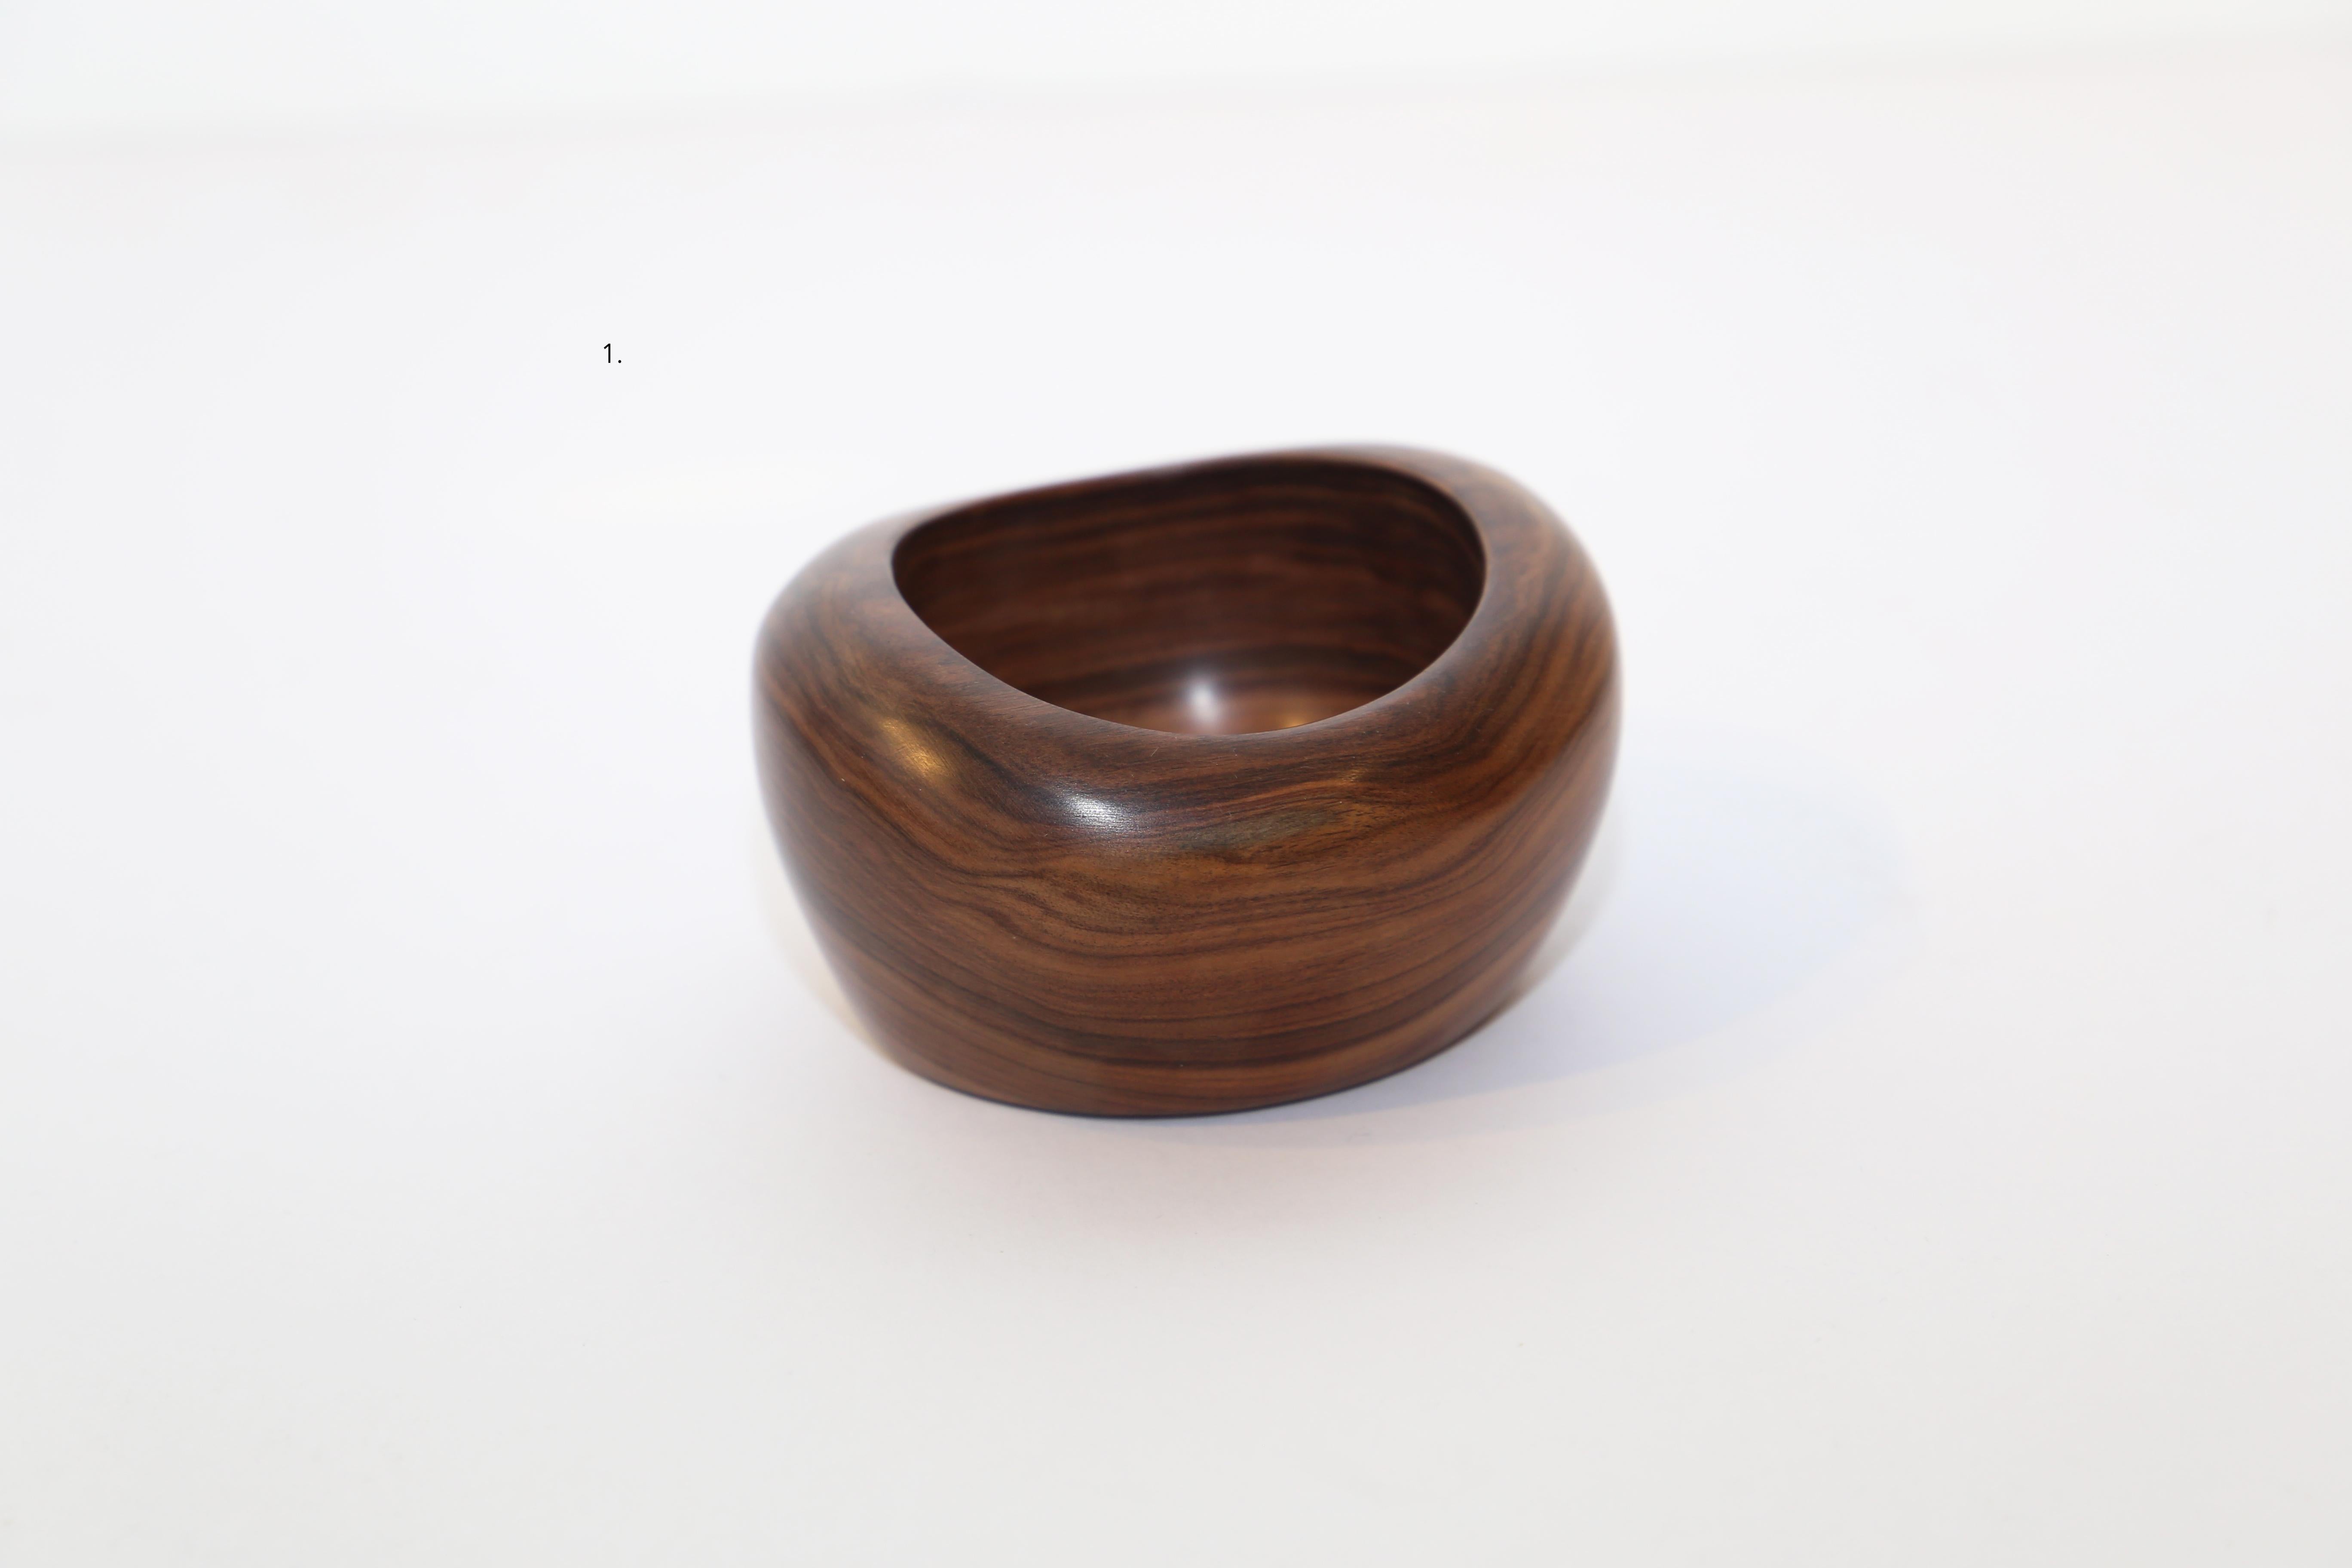 Bowls set by Odile Noll in different types of wood 

1 . 'Coupe', Violet wood, 5.5 x 10 x 8 cm
2. 'Coupe', Bubinga wood, 4 x 9 x 7.5 cm
3. 'Coupe', Rosewood, 2 x 8 x 5.5 cm
4. 'Coupe', Rosewood, 3 x 16.5 x 7.5 cm
5. 'Coupe', Violet wood, 5 x